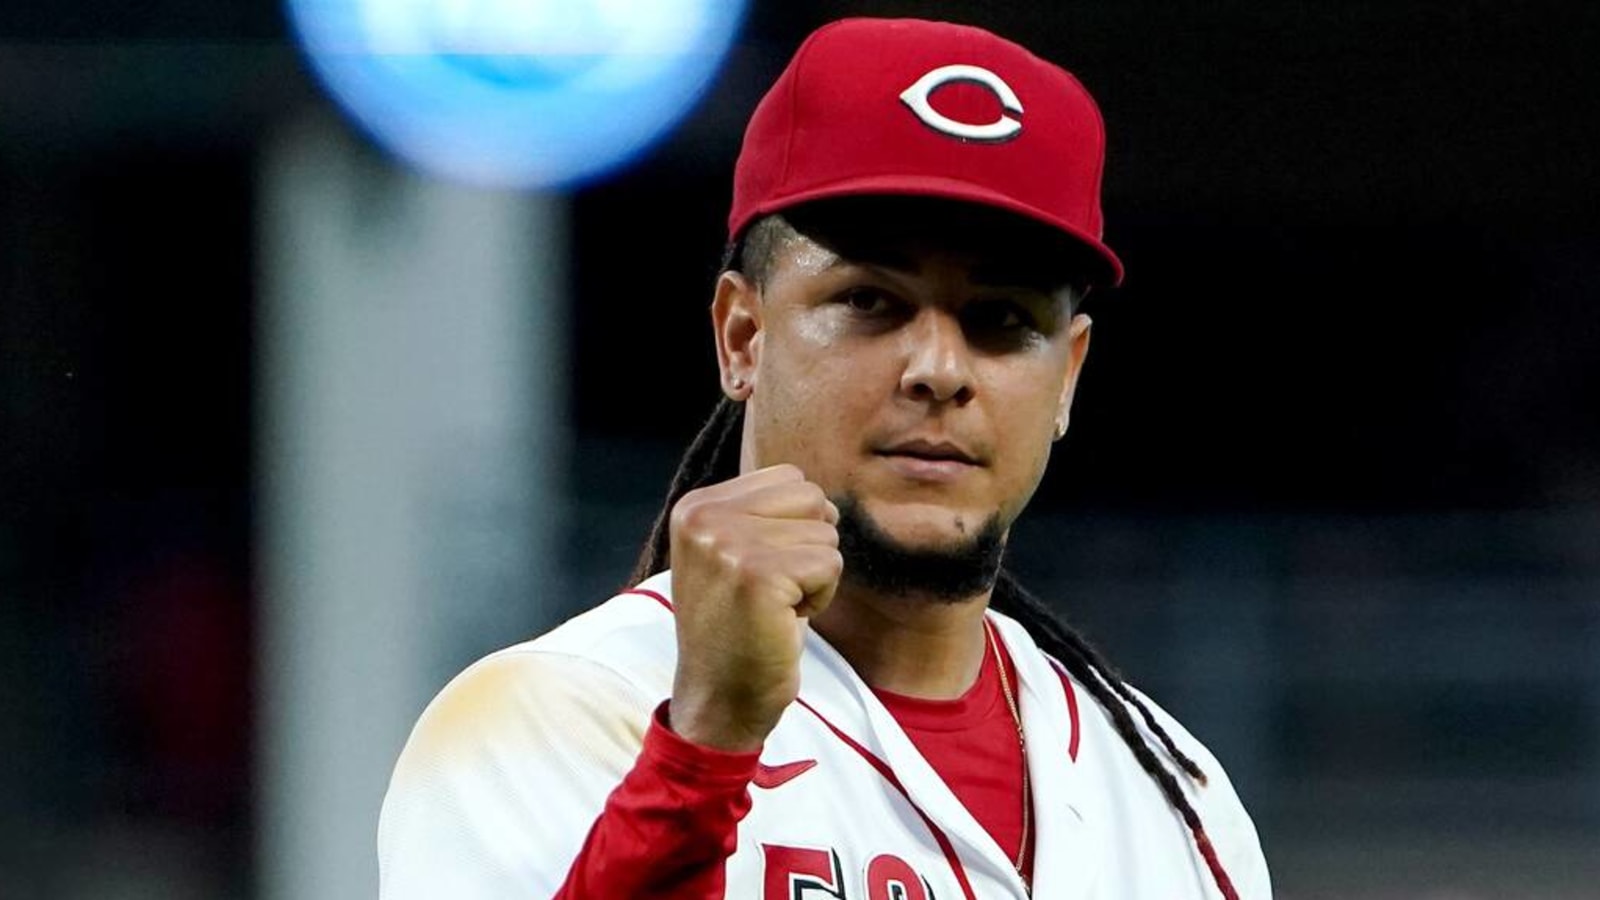 Mariners acquire Luis Castillo from Reds for prospect package including Noelvi Marte